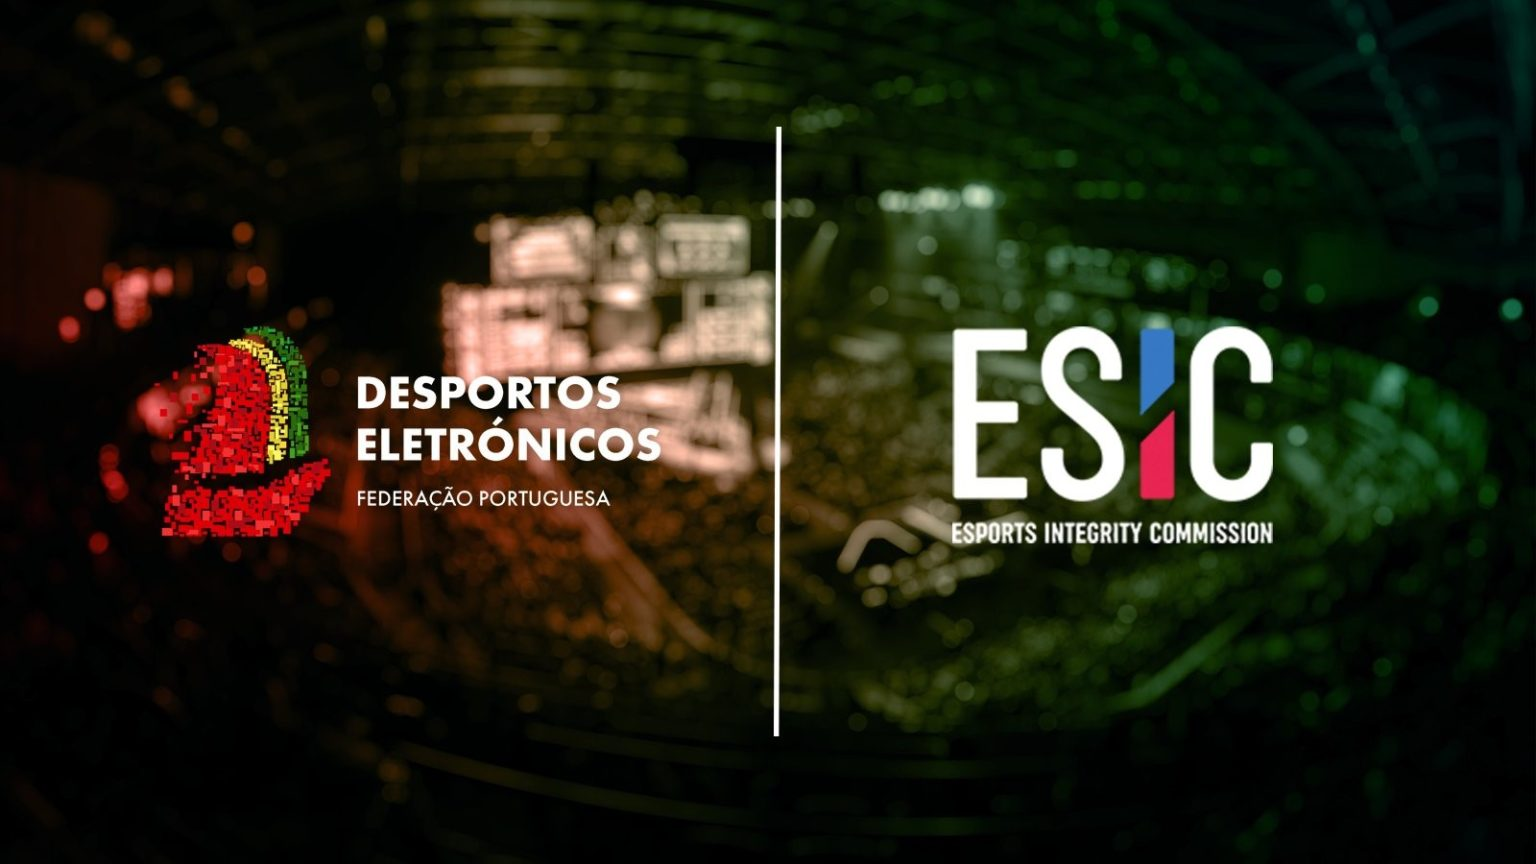 The Portuguese Esports Federation will have to comply with the ESIC’s Anti-Corruption Code, Player Code of Conduct and Anti-Doping Code ©Portuguese Esports Federation